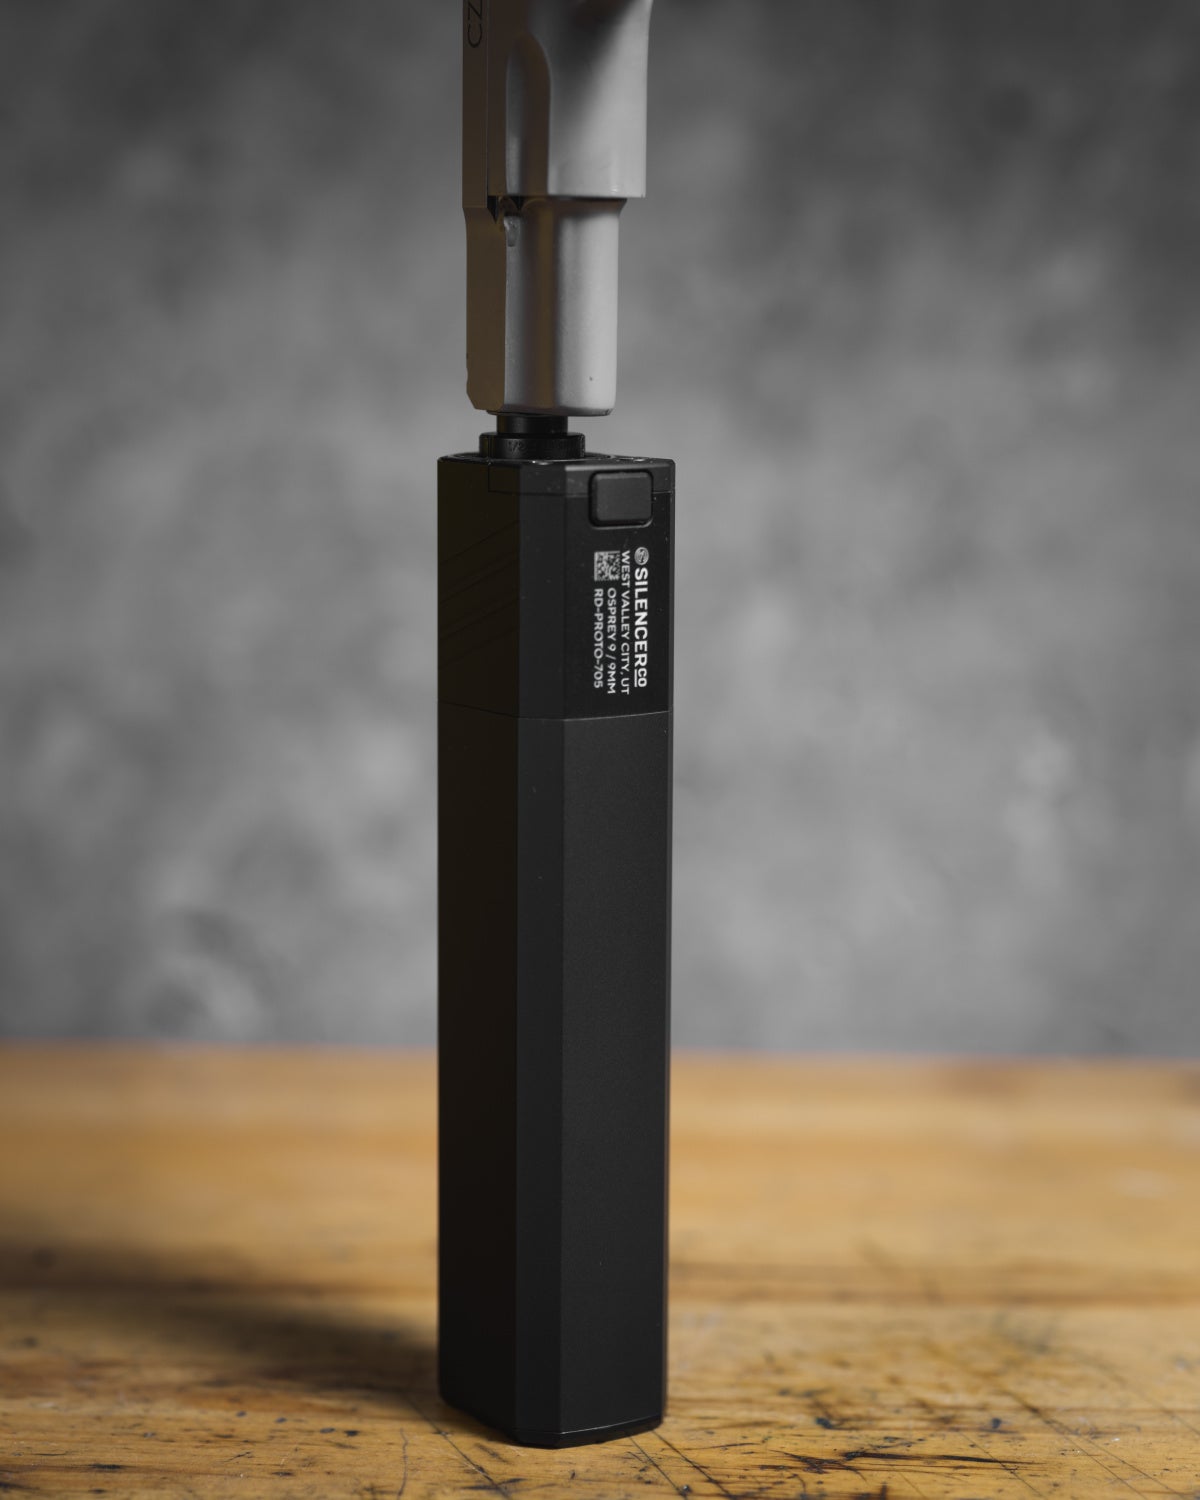 The SilencerCo Osprey Gets An Upgrade; Nominated For Silencer Hall Of Fame